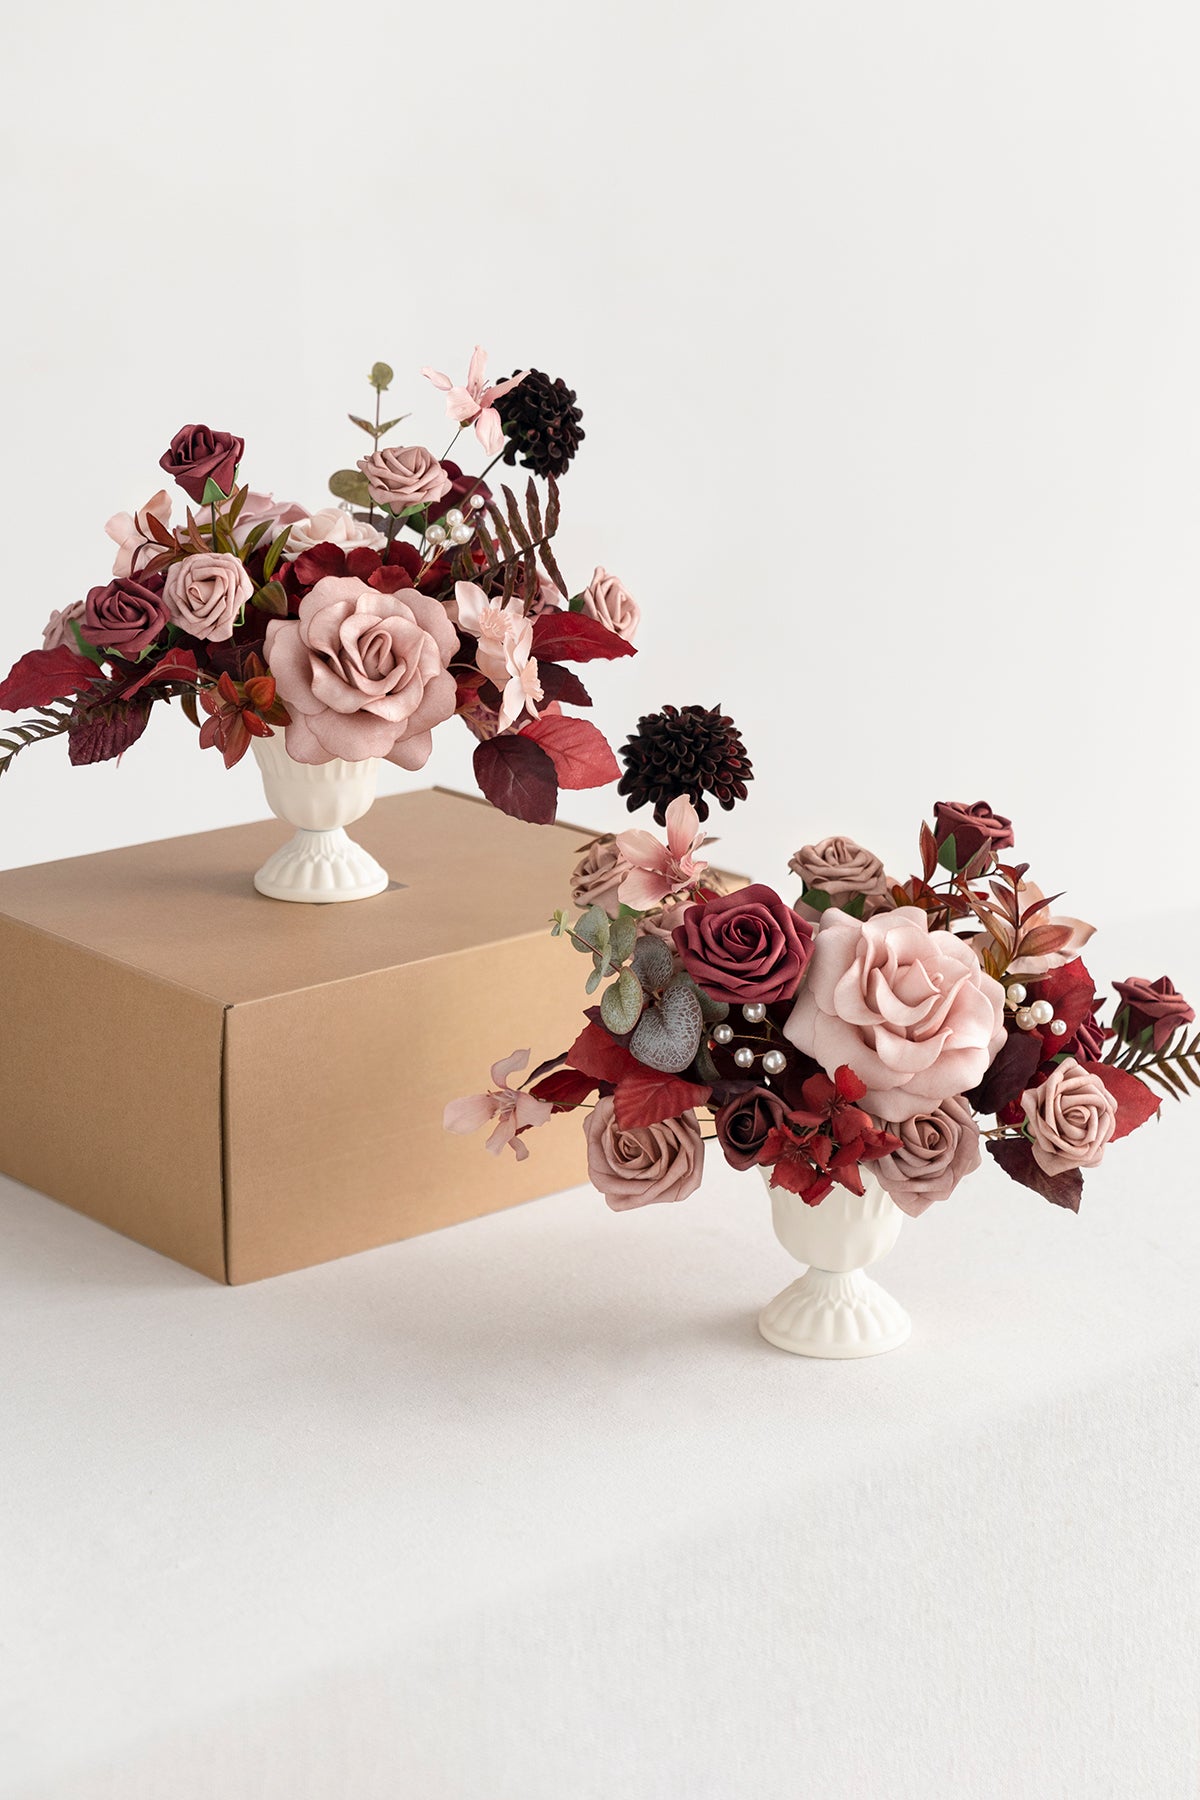 Large Floral Centerpiece Set in Burgundy & Dusty Rose | Clearance